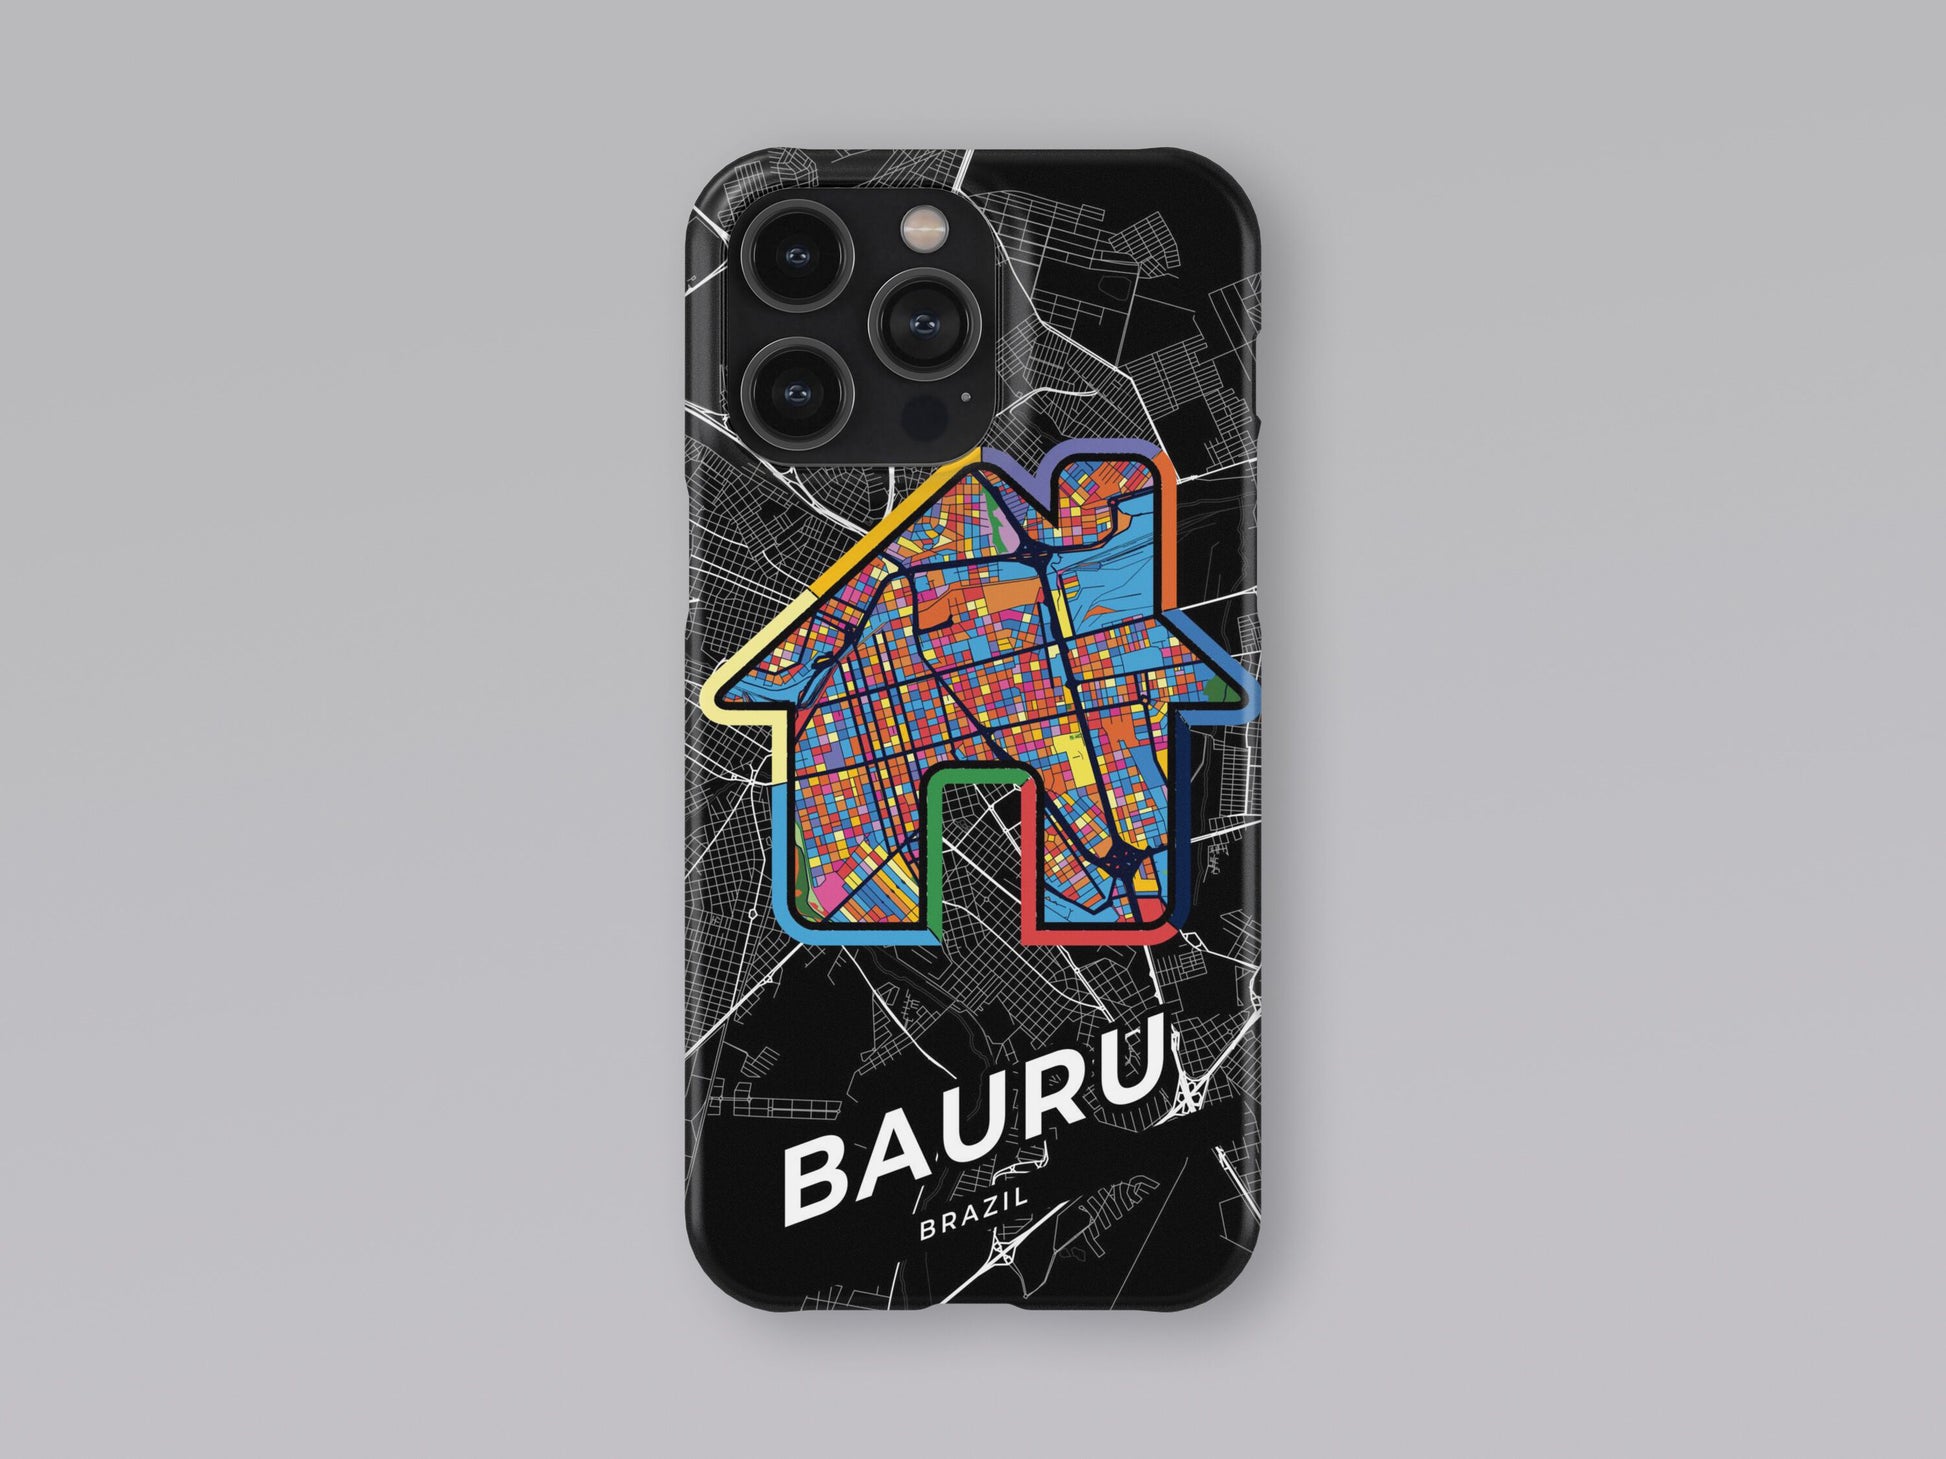 Bauru Brazil slim phone case with colorful icon. Birthday, wedding or housewarming gift. Couple match cases. 3